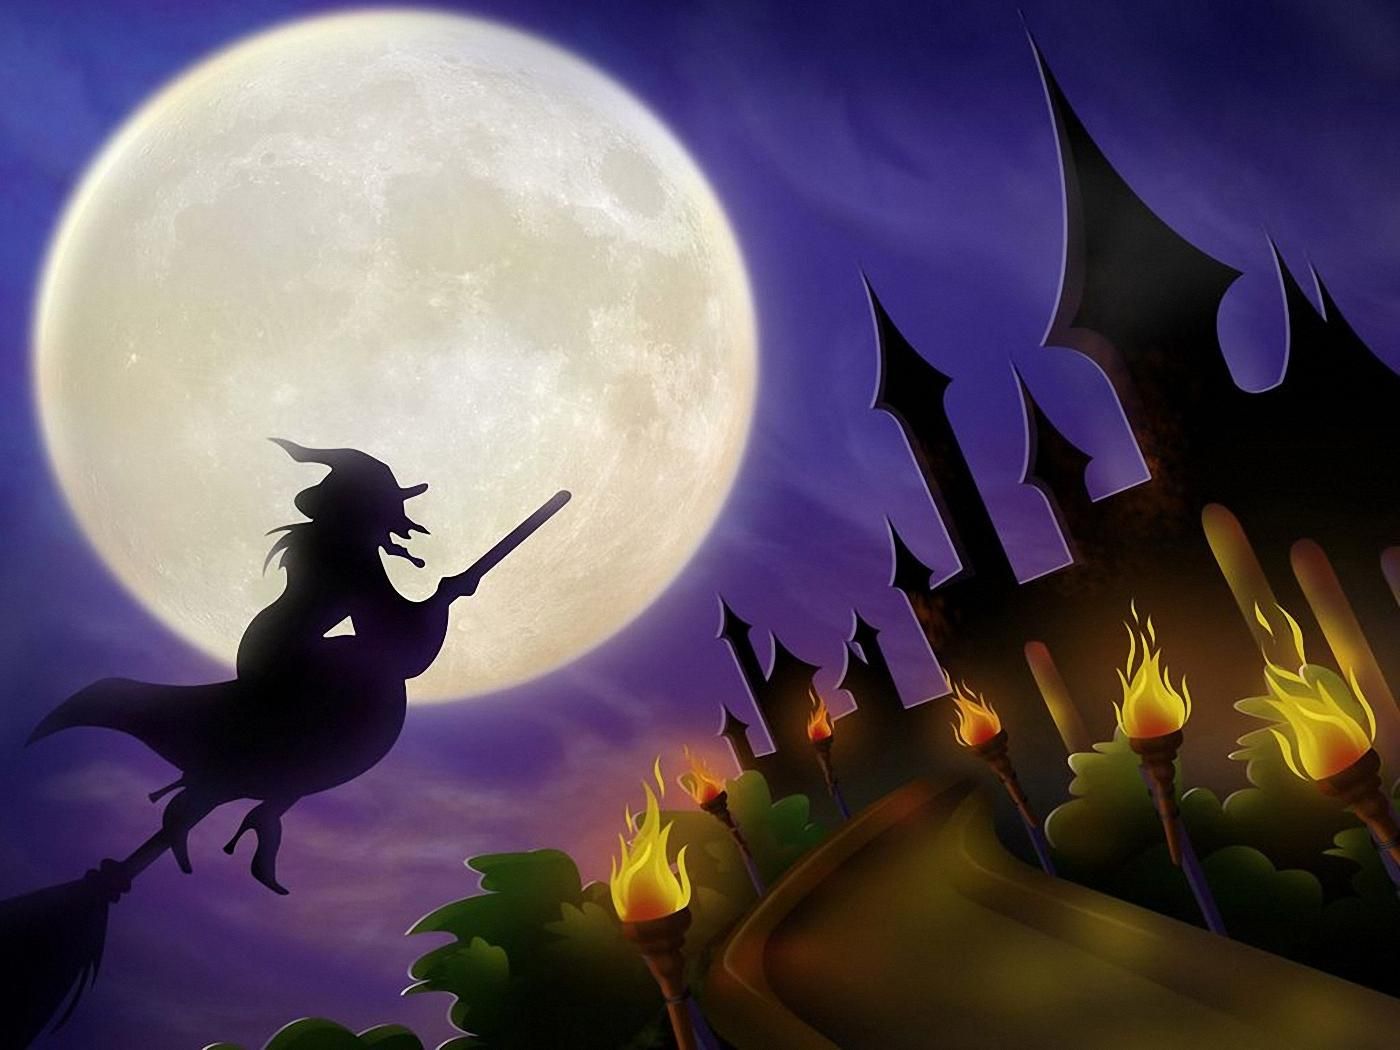 Halloween witch wallpaper Vector Image  1486816  StockUnlimited